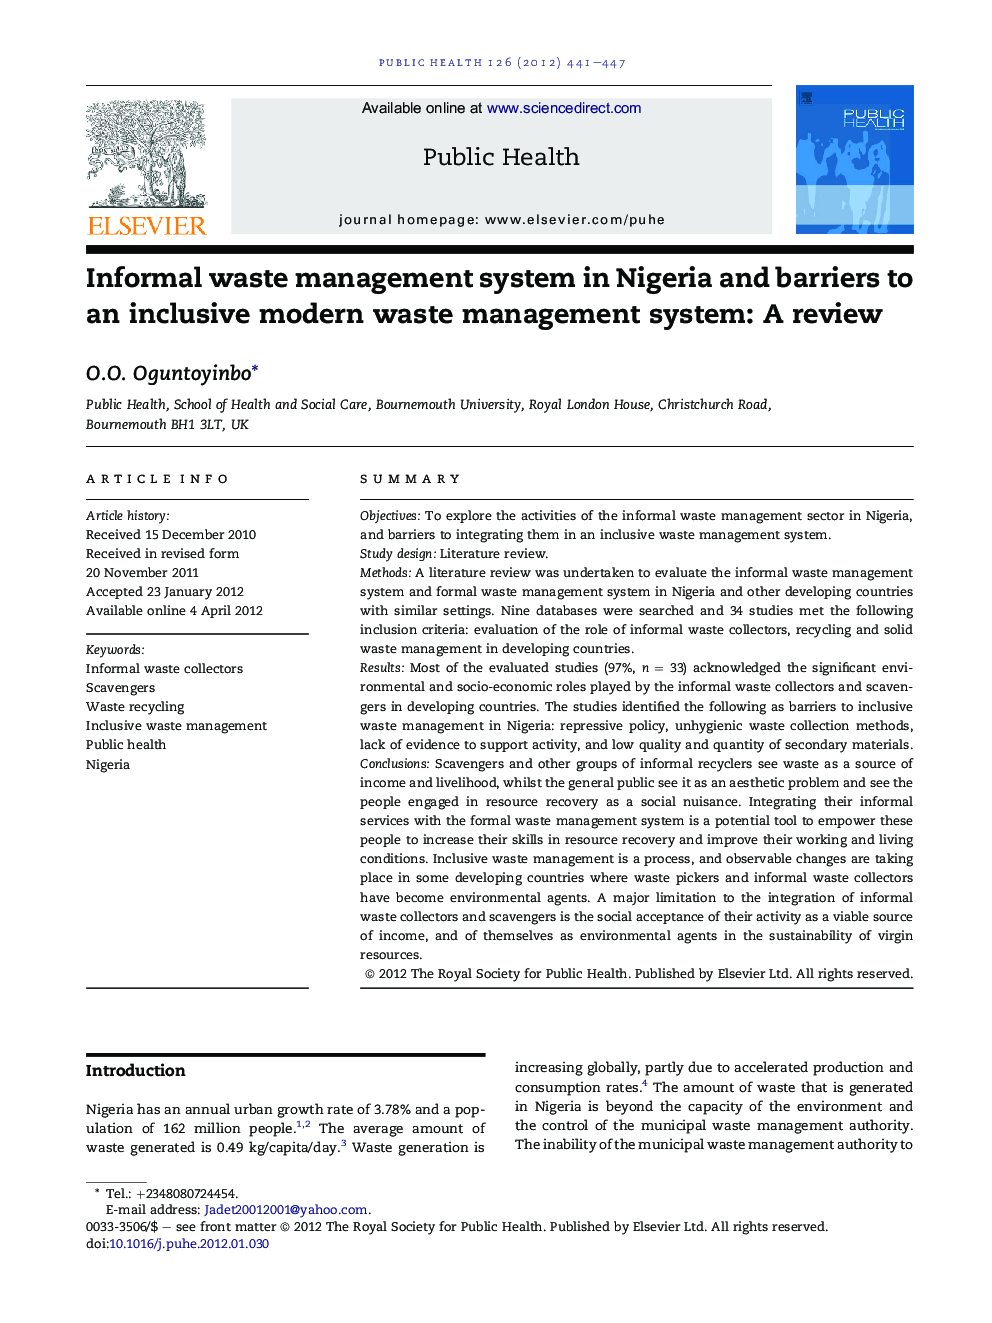 Informal waste management system in Nigeria and barriers to an inclusive modern waste management system: A review